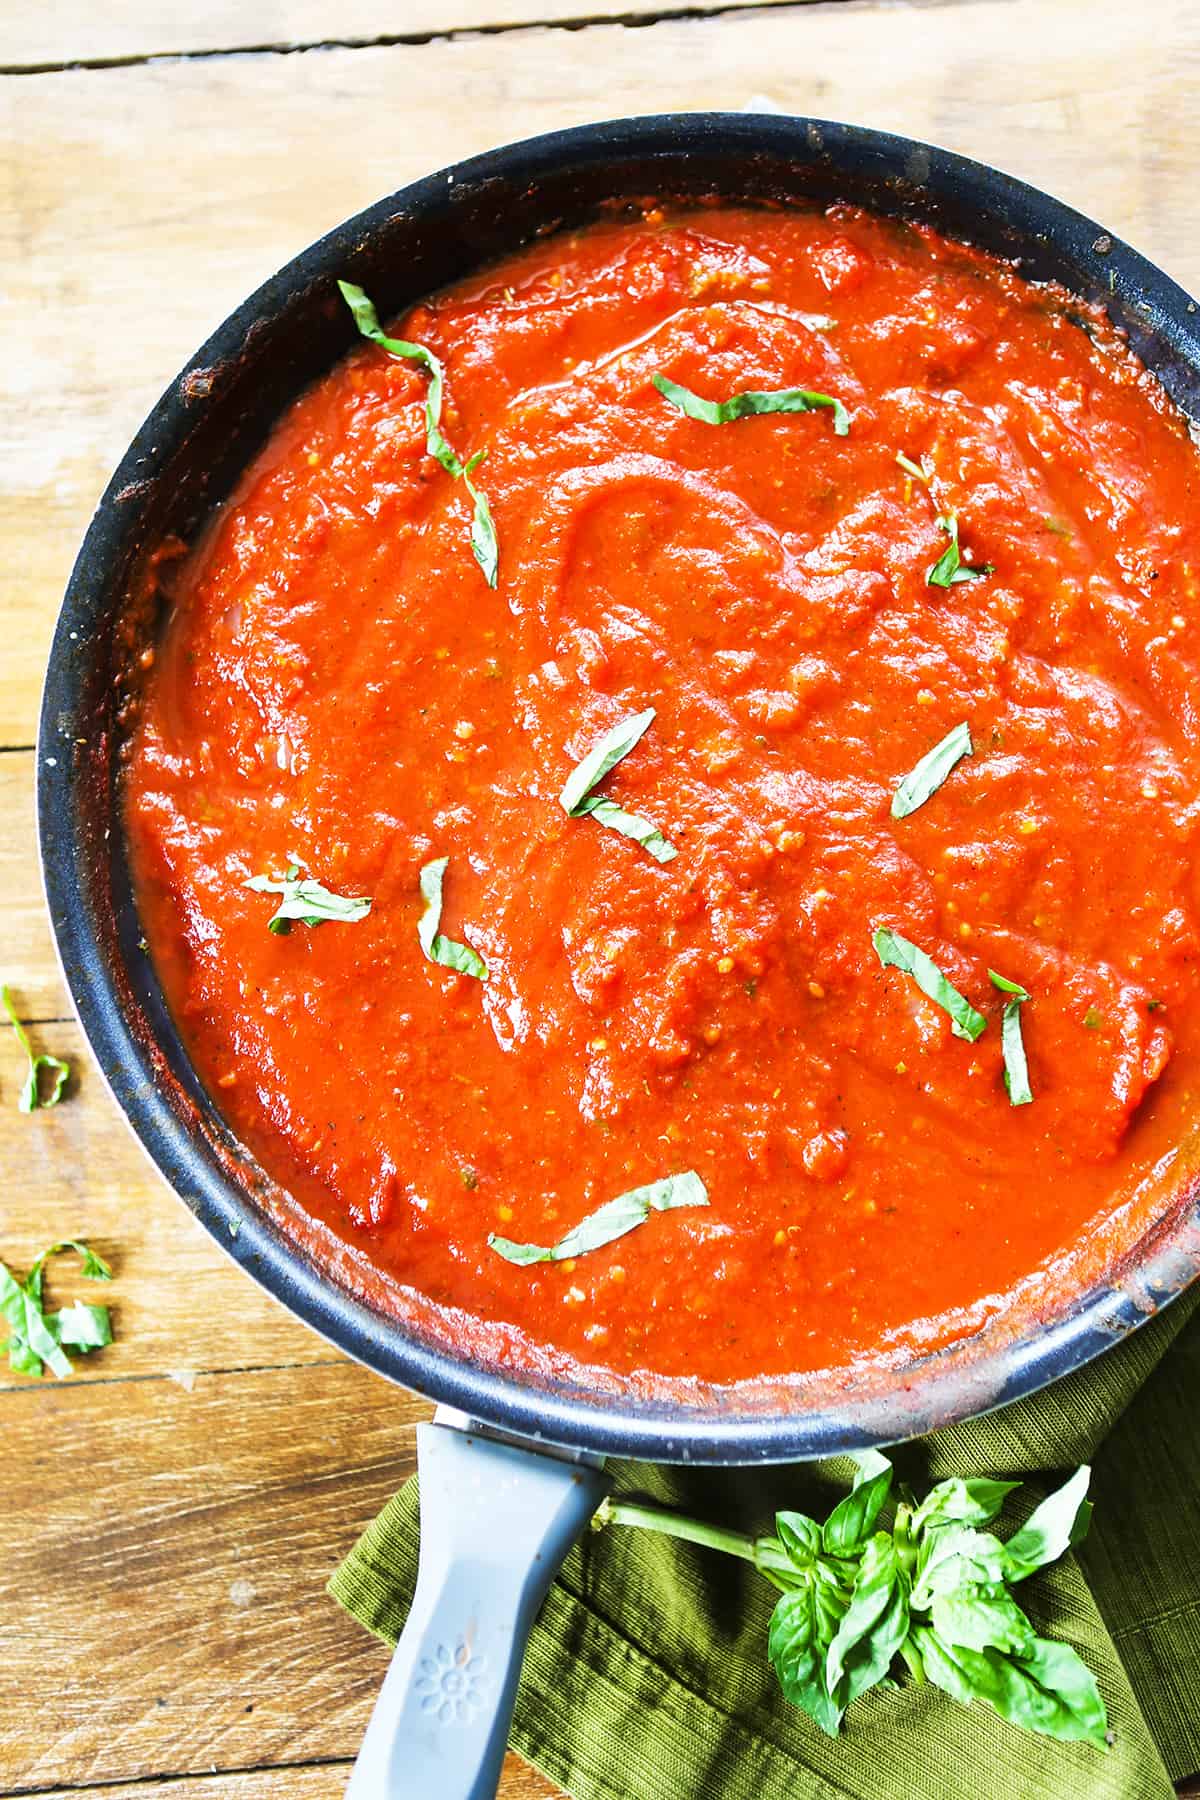 Skillet filled with marinara sauce and basil leaves.